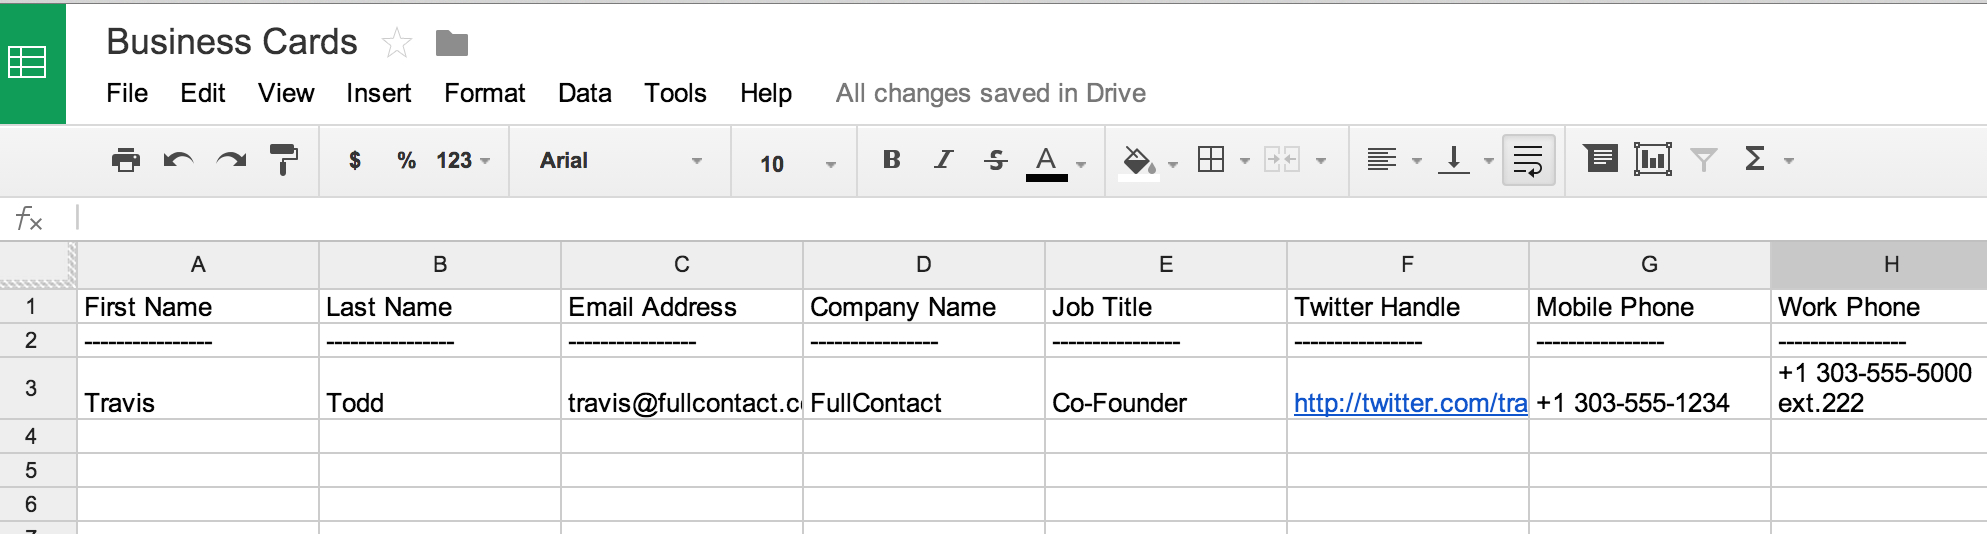 How To Scan Business Cards Into A Spreadsheet With Google Docs Business Card Template